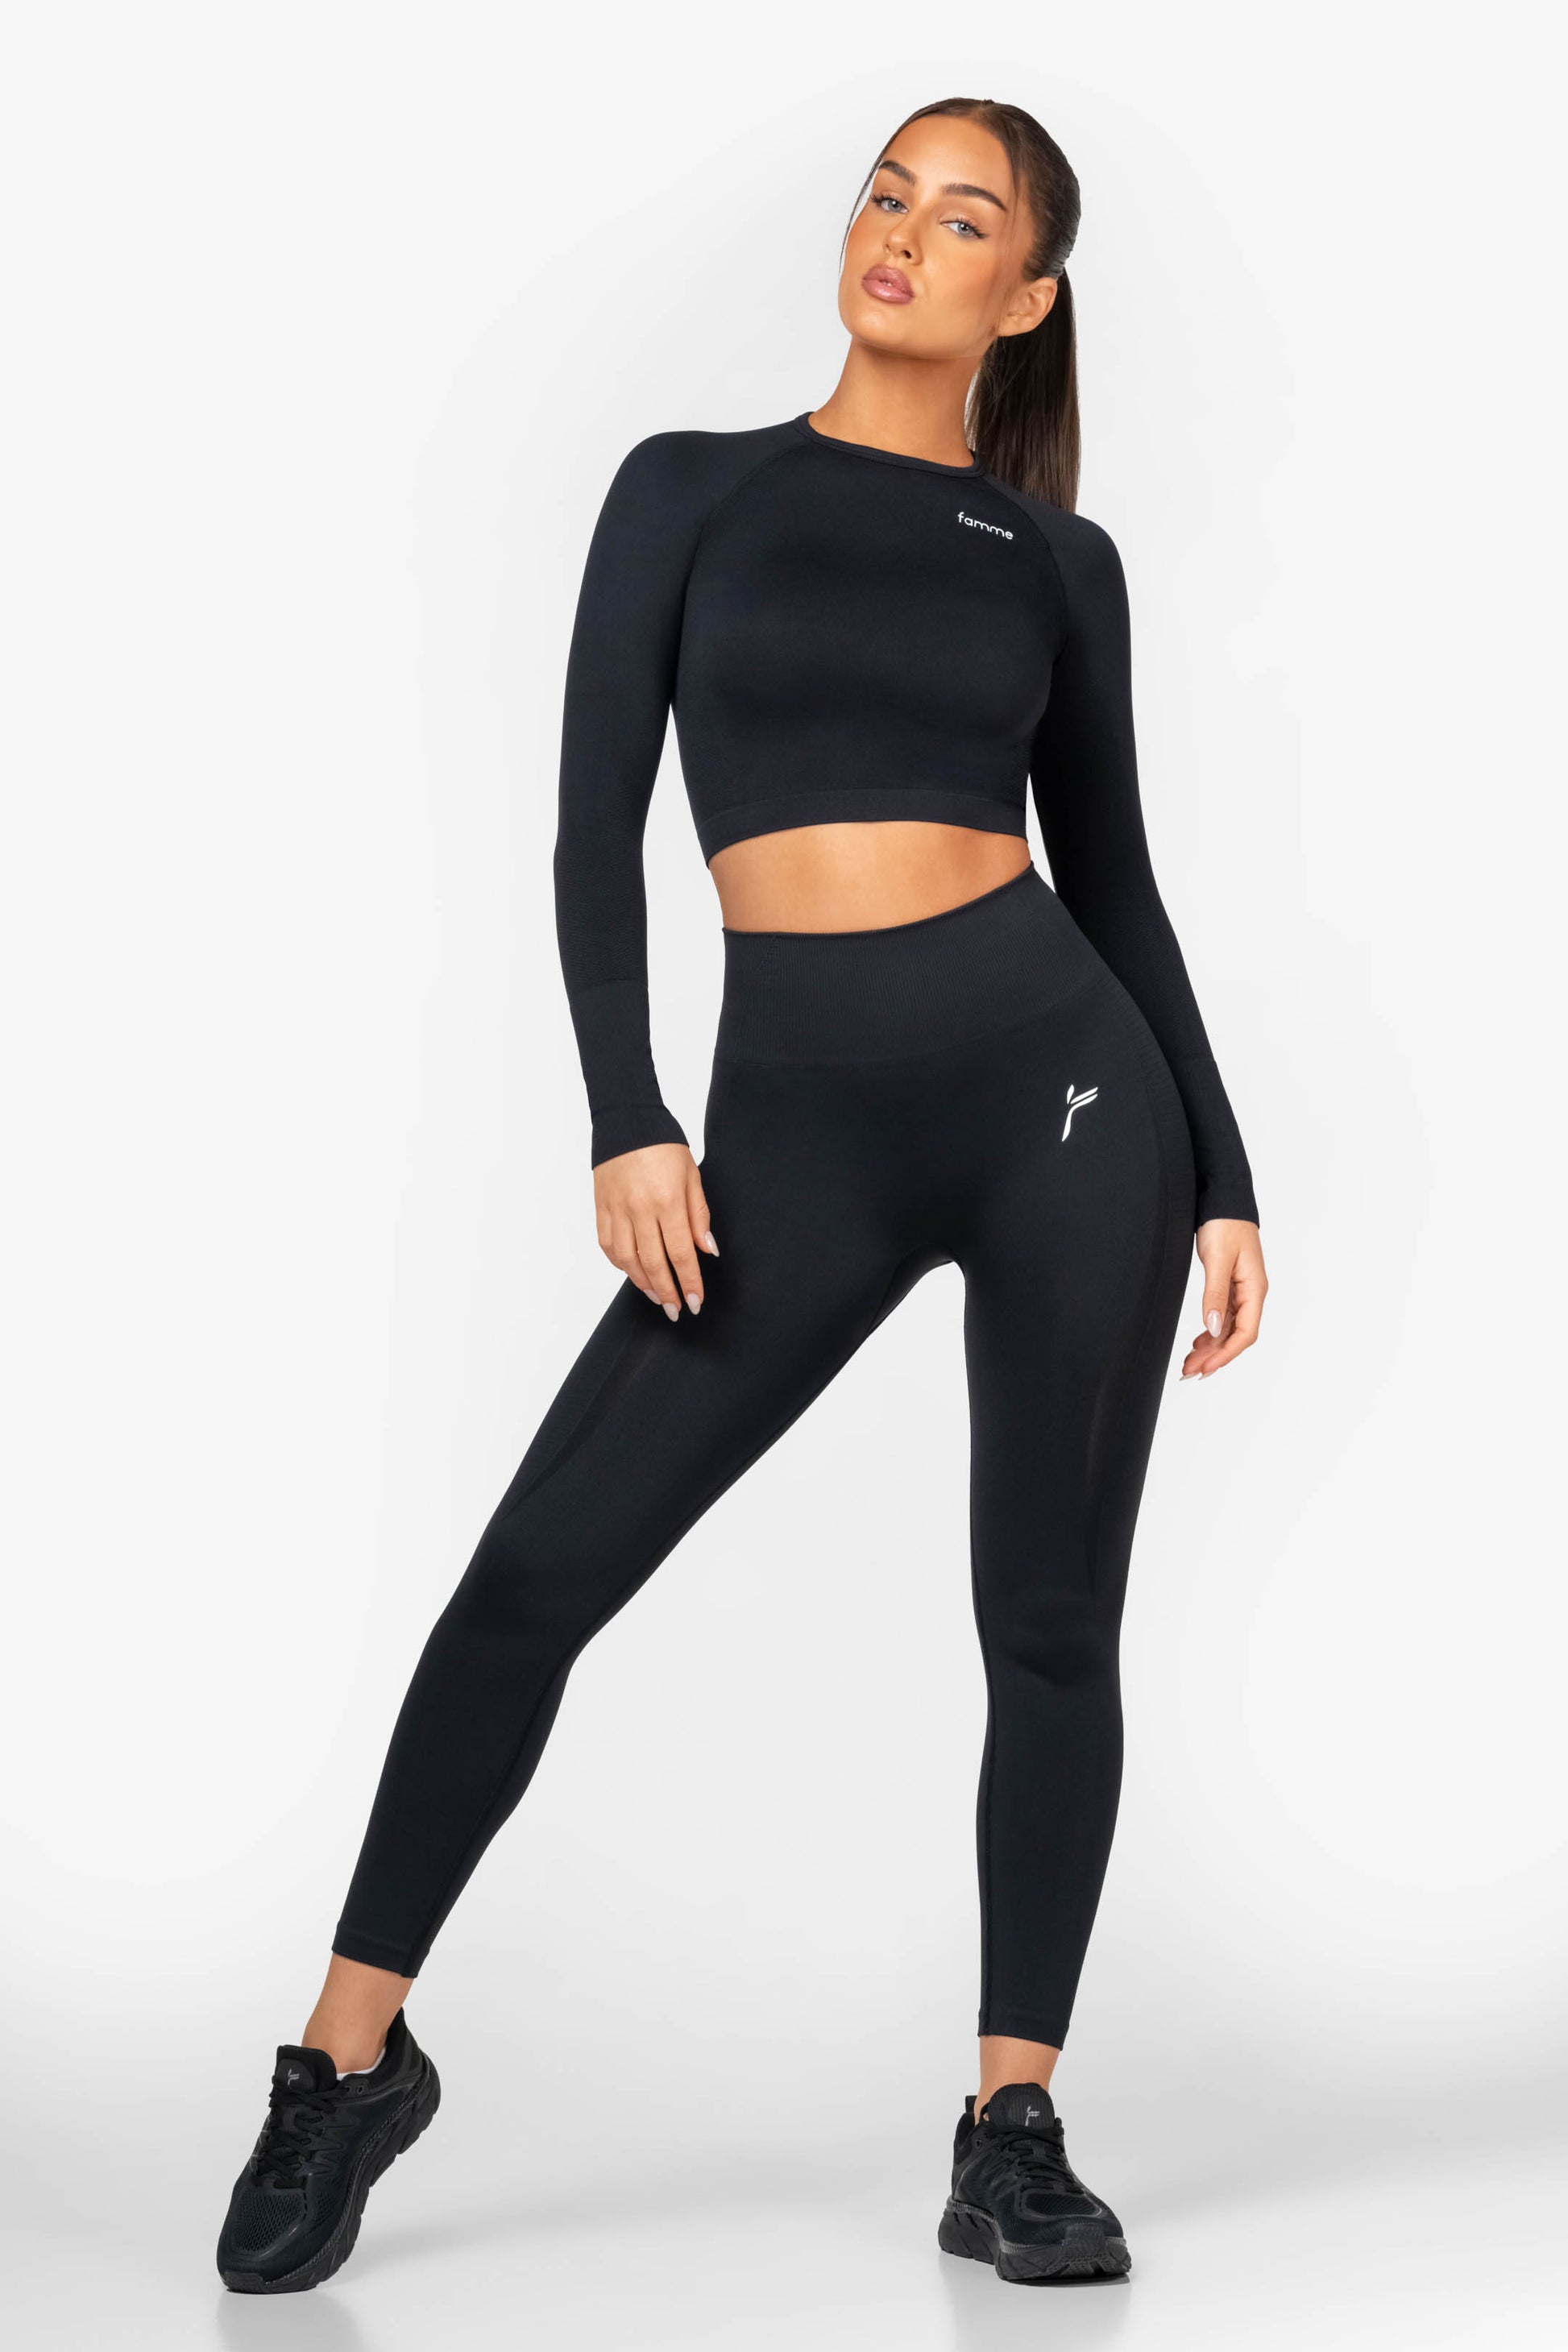 High-Waisted Lace Seamless Leggings - 2 for £24 for new VIPs!